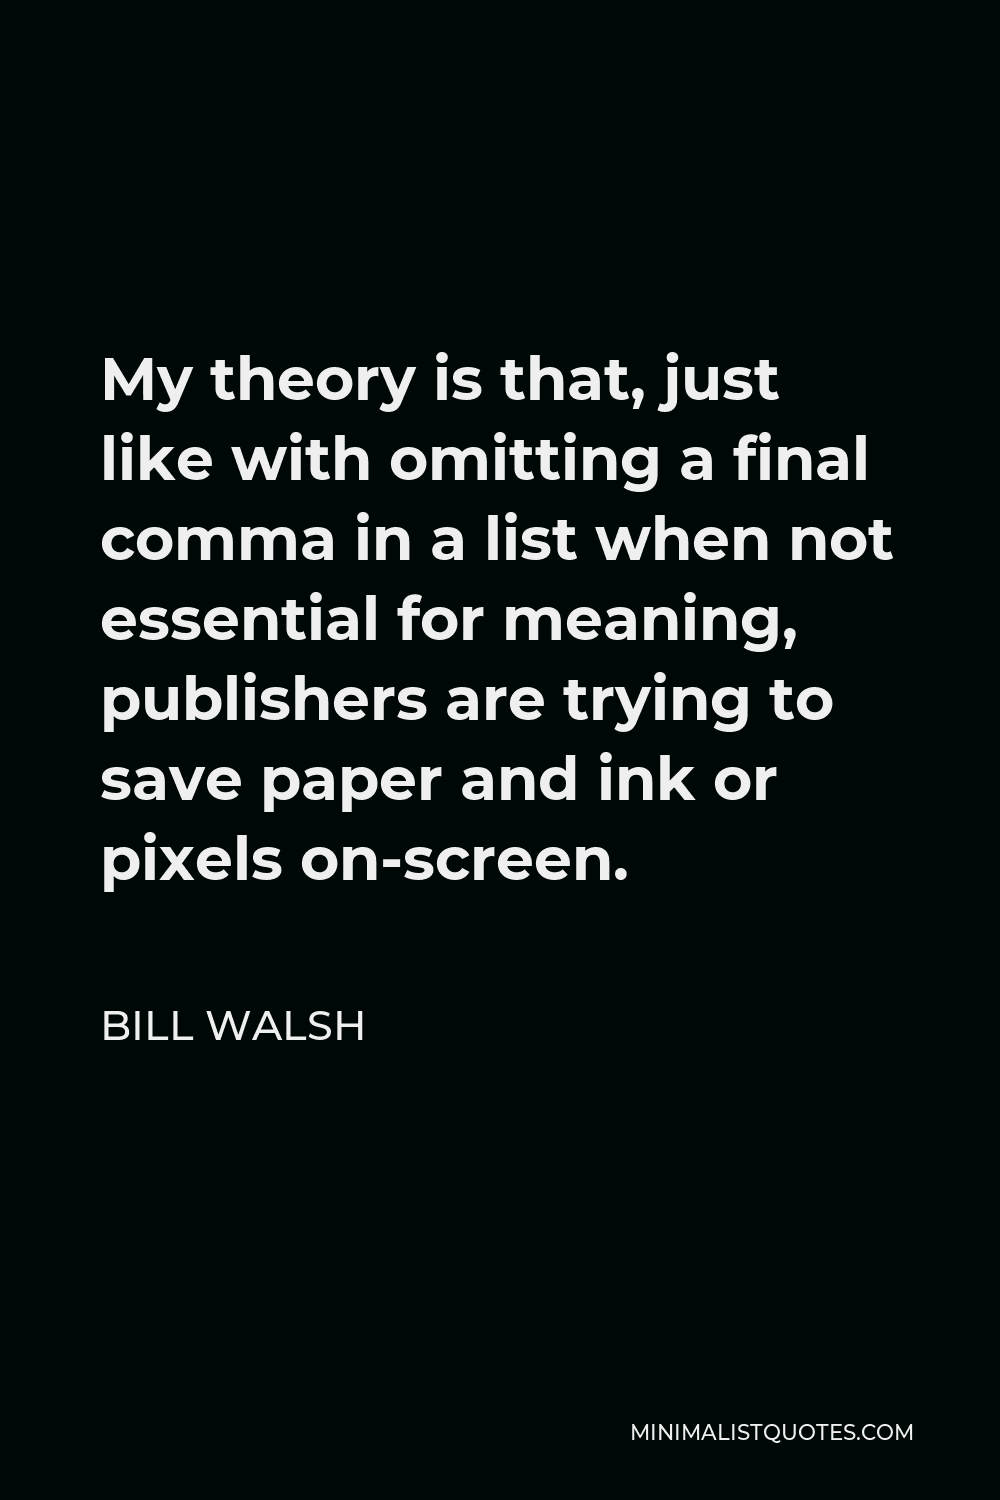 Bill Walsh Quote - My theory is that, just like with omitting a final comma in a list when not essential for meaning, publishers are trying to save paper and ink or pixels on-screen.